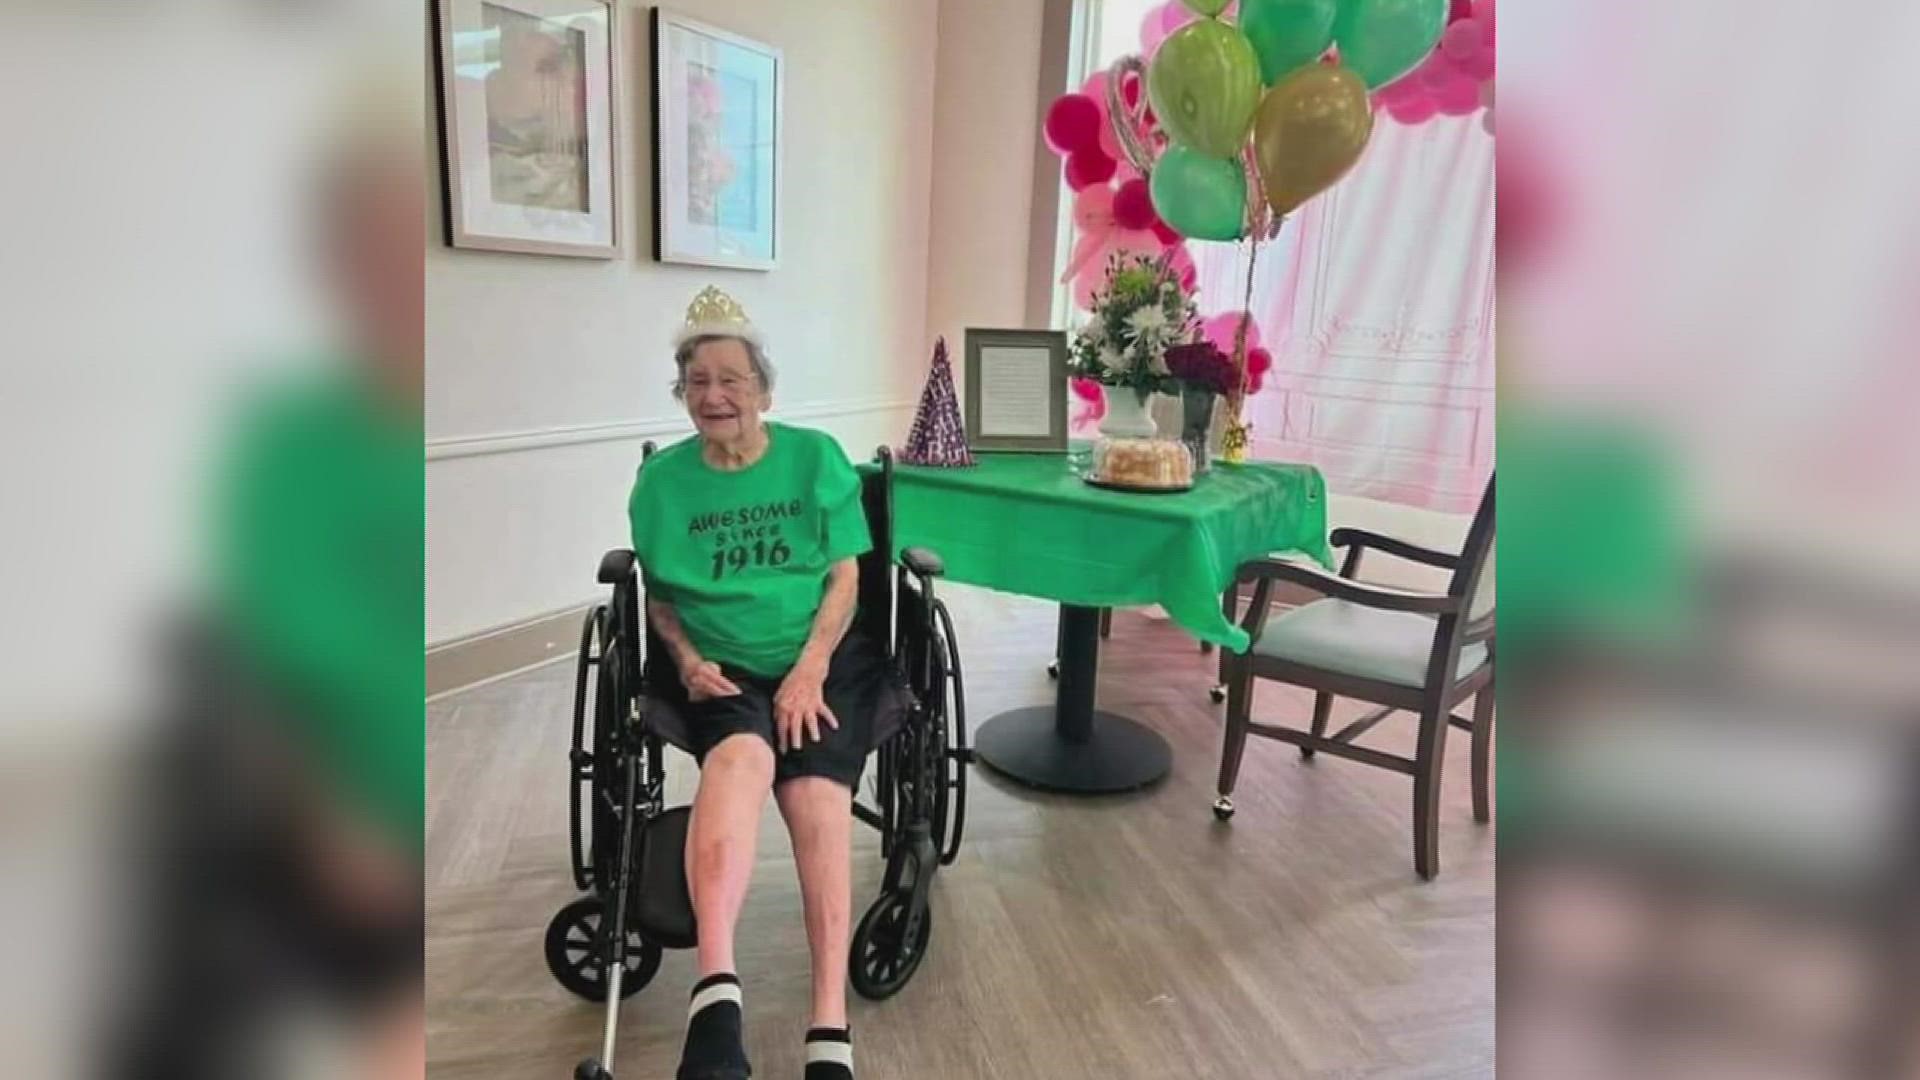 Cornelia Dickinson turned 106 on Tuesday. Staff at the Bonne Vie Continuing Care Network in Port Arthur helped her celebrate the major milestone.